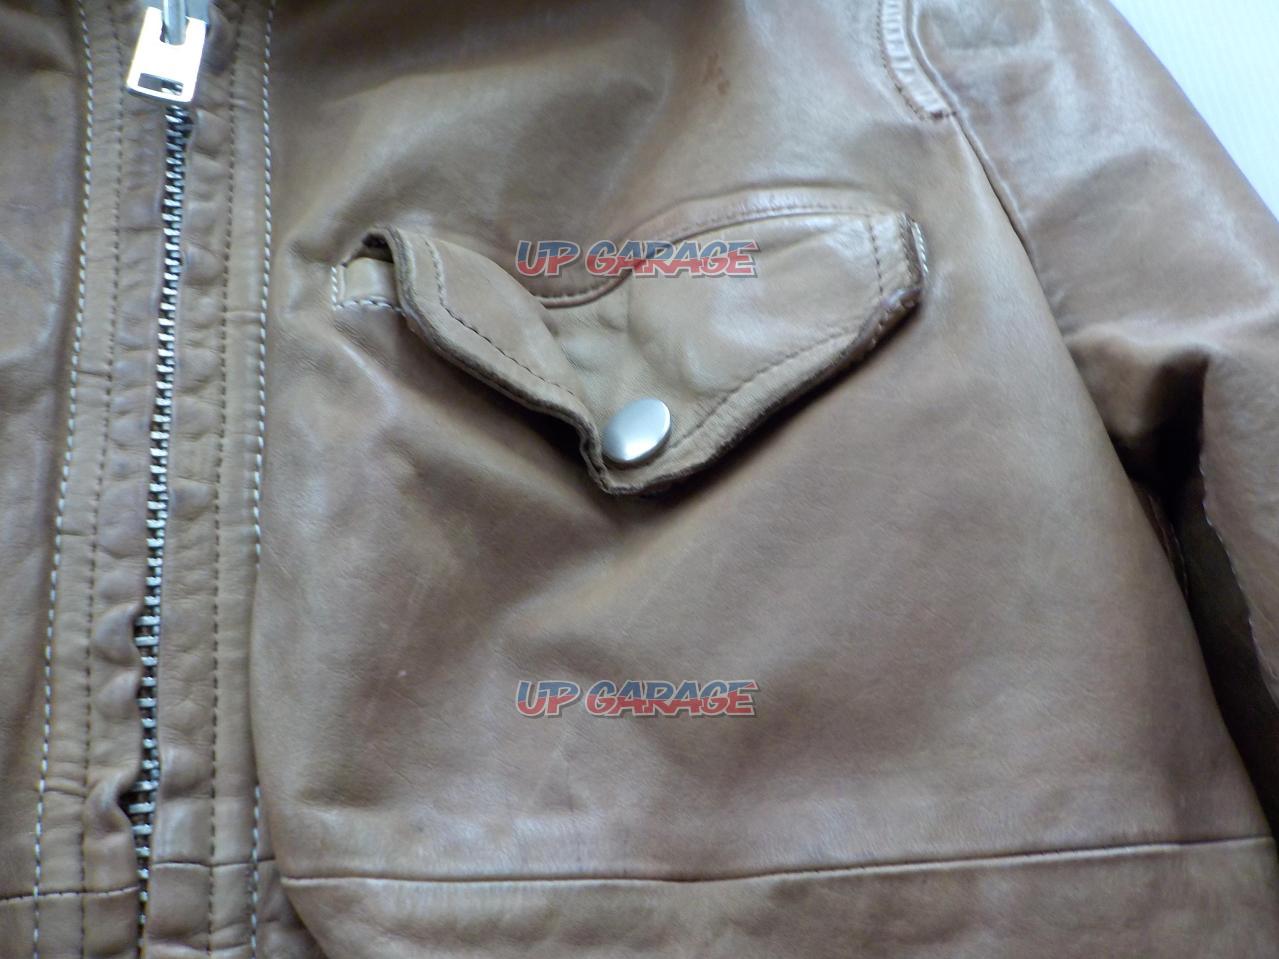 Size: Unknown Ray BEAMS Leather Jacket Spring / Autumn | Leather